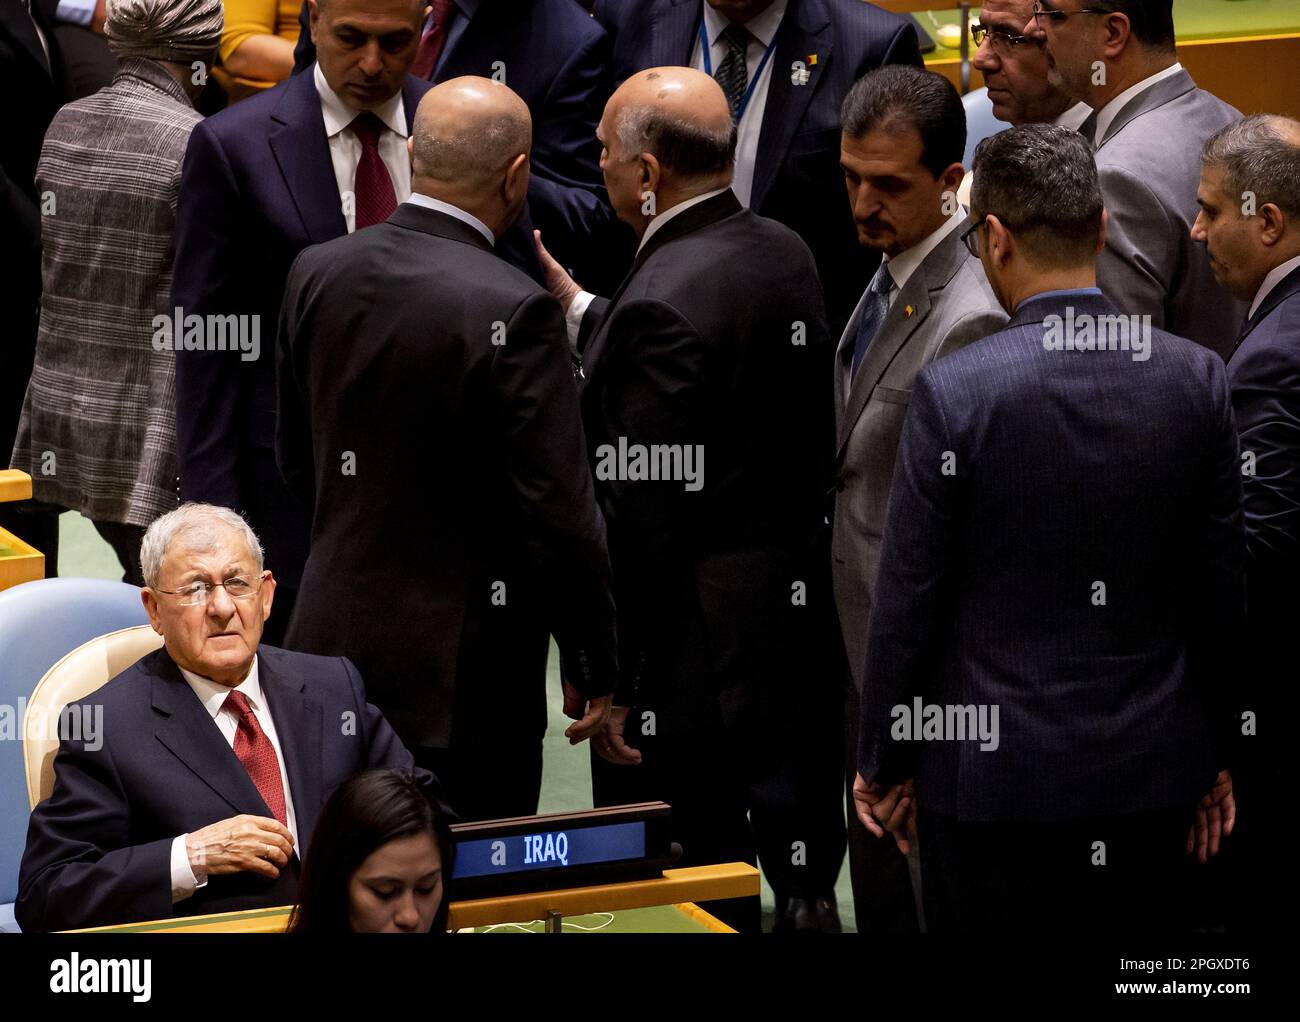 NEW YORK - President Latif Rashid of Iraq during the conclusion of the United Nations water conference. The conference serves as a prelude to the climate summit in Dubai later this year. ANP KOEN VAN WEEL netherlands out - belgium out Stock Photo